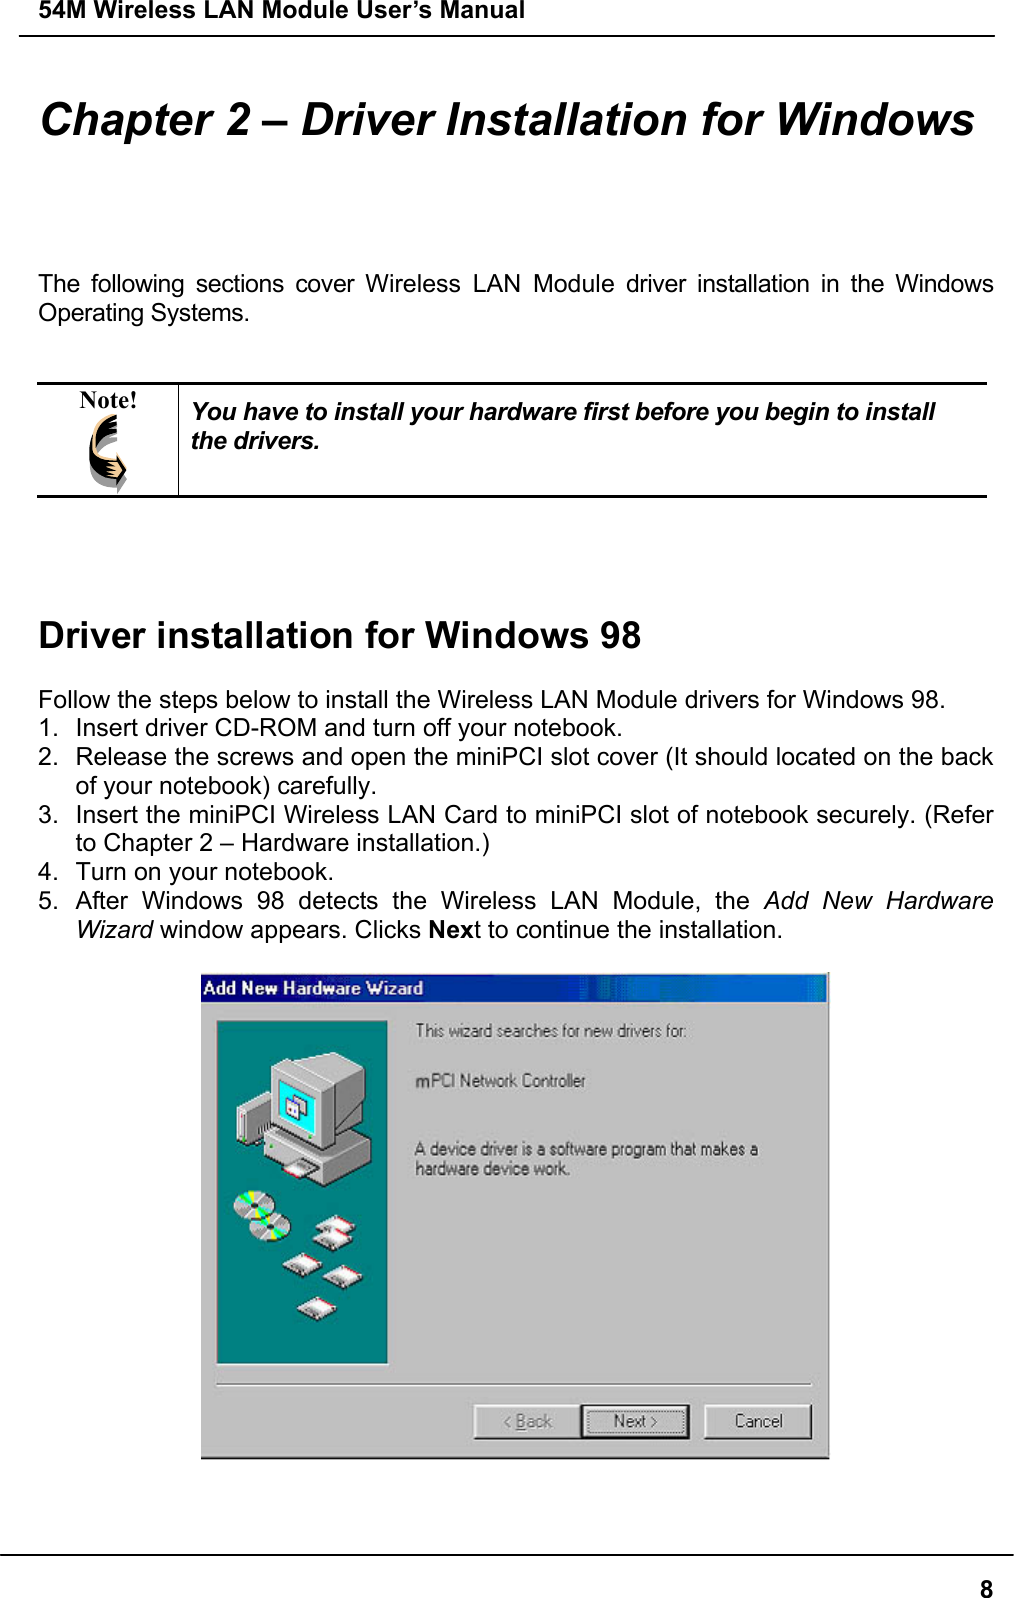 54M Wireless LAN Module User’s Manual  8Chapter 2 – Driver Installation for Windows The following sections cover Wireless LAN Module driver installation in the Windows Operating Systems.   Note!  You have to install your hardware first before you begin to install the drivers.     Driver installation for Windows 98  Follow the steps below to install the Wireless LAN Module drivers for Windows 98. 1.  Insert driver CD-ROM and turn off your notebook. 2.  Release the screws and open the miniPCI slot cover (It should located on the back of your notebook) carefully. 3.  Insert the miniPCI Wireless LAN Card to miniPCI slot of notebook securely. (Refer to Chapter 2 – Hardware installation.) 4.  Turn on your notebook. 5. After Windows 98 detects the Wireless LAN Module, the Add New Hardware Wizard window appears. Clicks Next to continue the installation.      